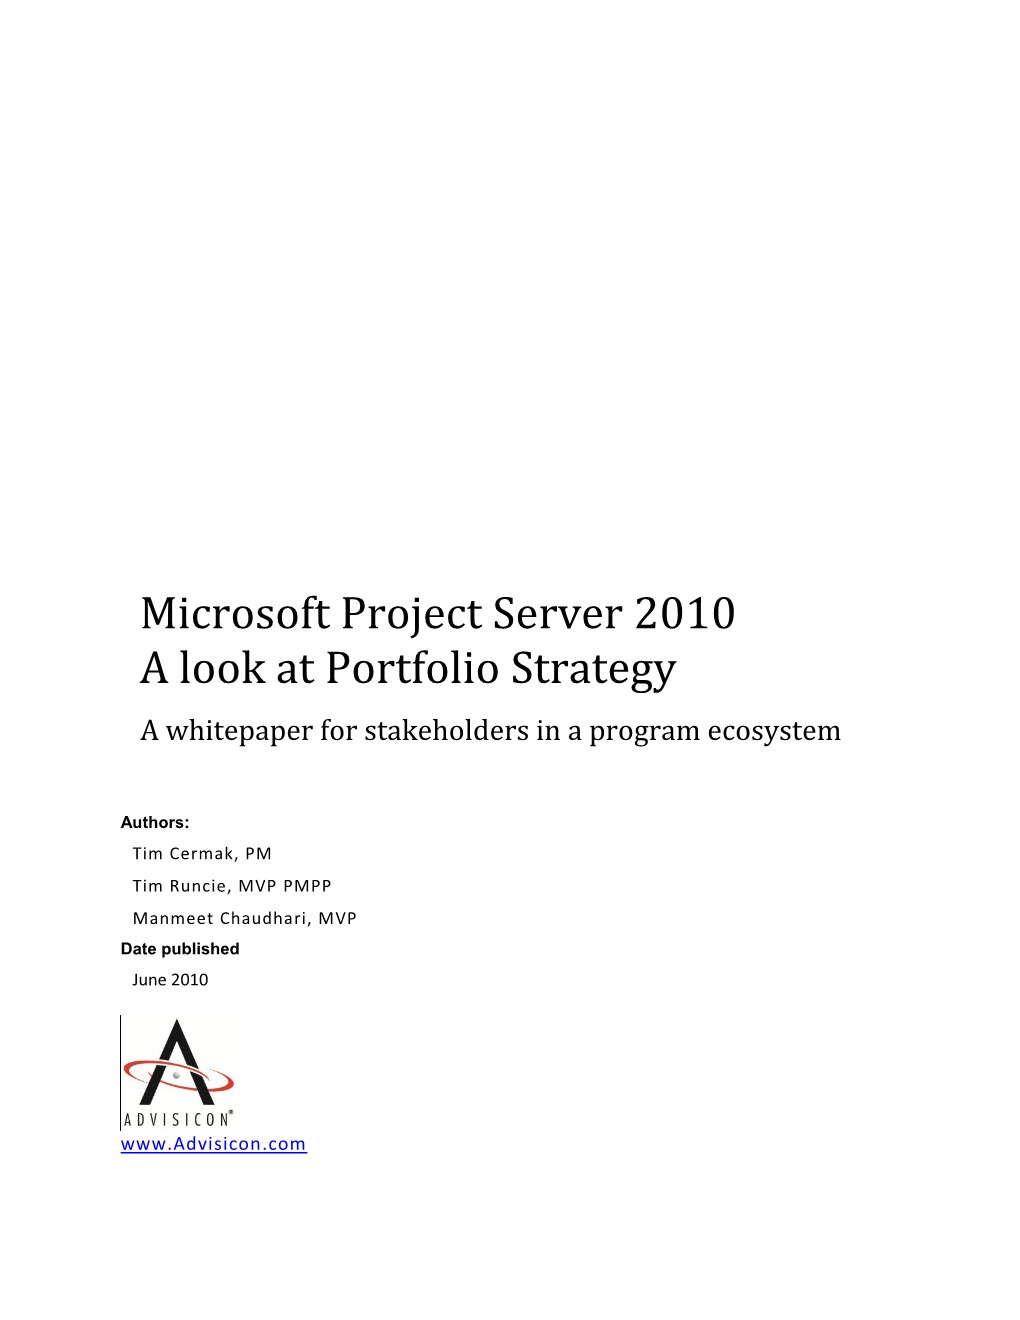 Microsoft Project Server 2010 a Look at Portfolio Strategy